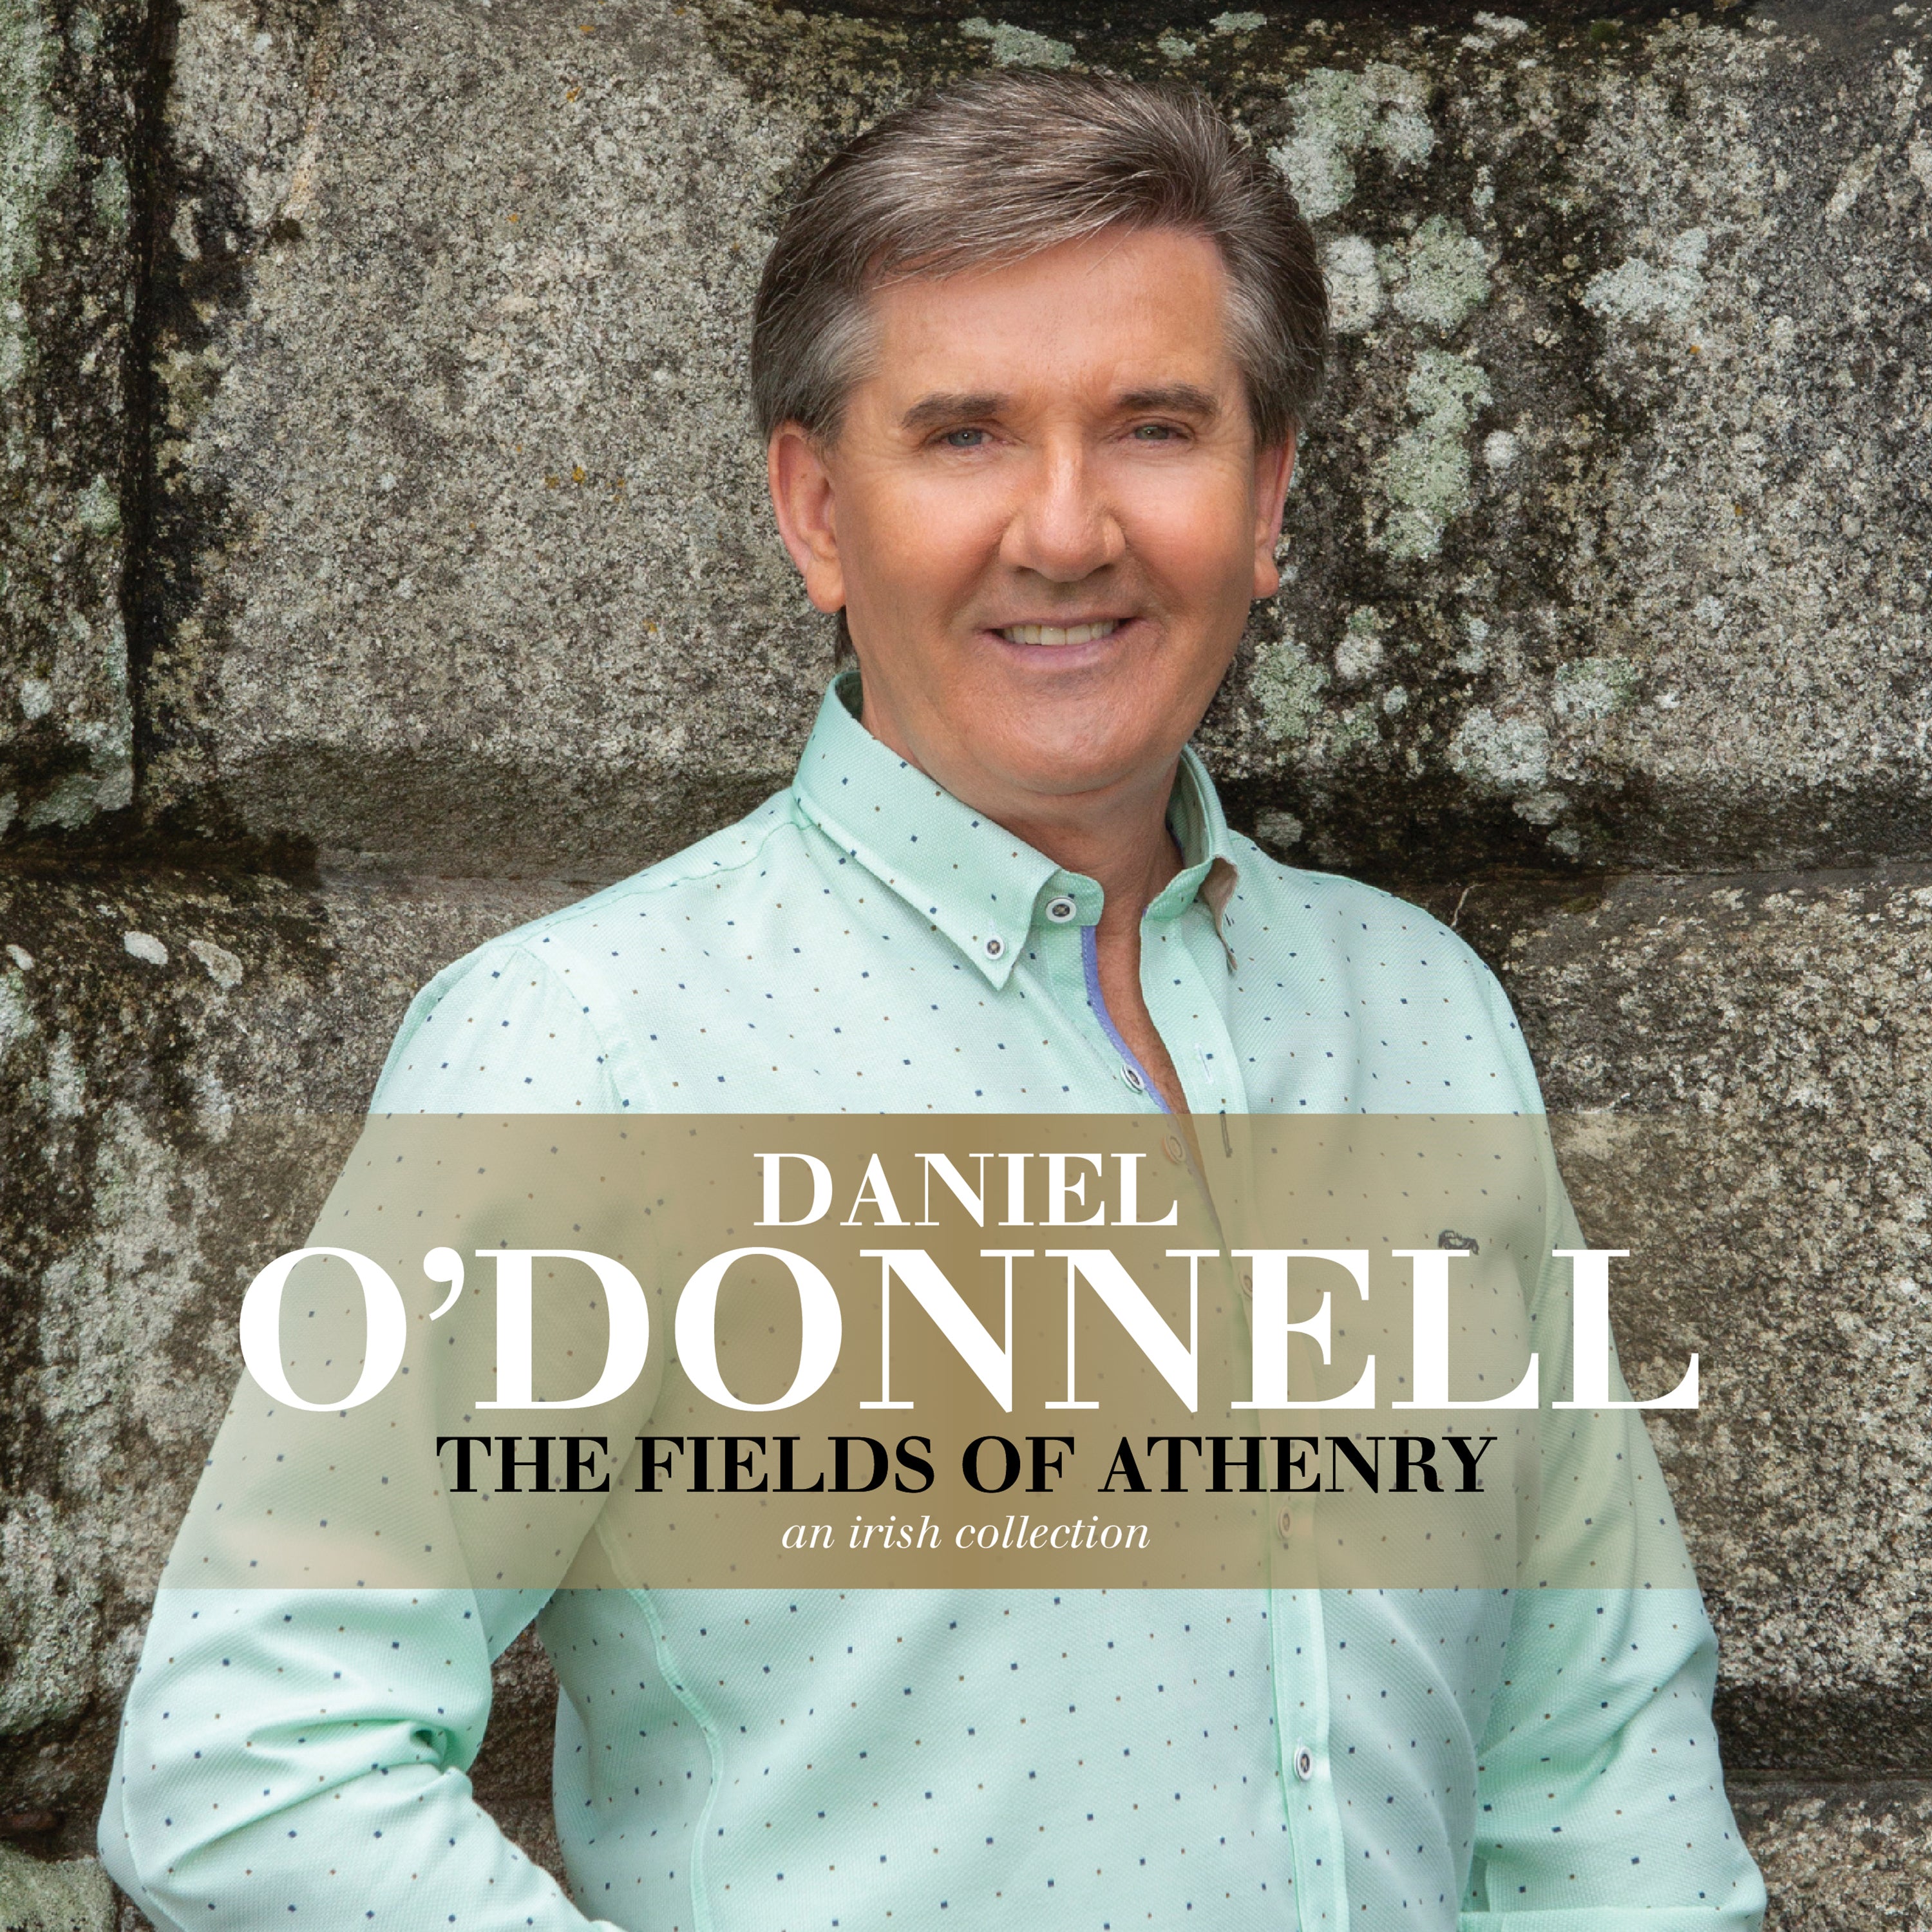 DANIEL O'DONNELL - THE FIELDS OF ATHENRY